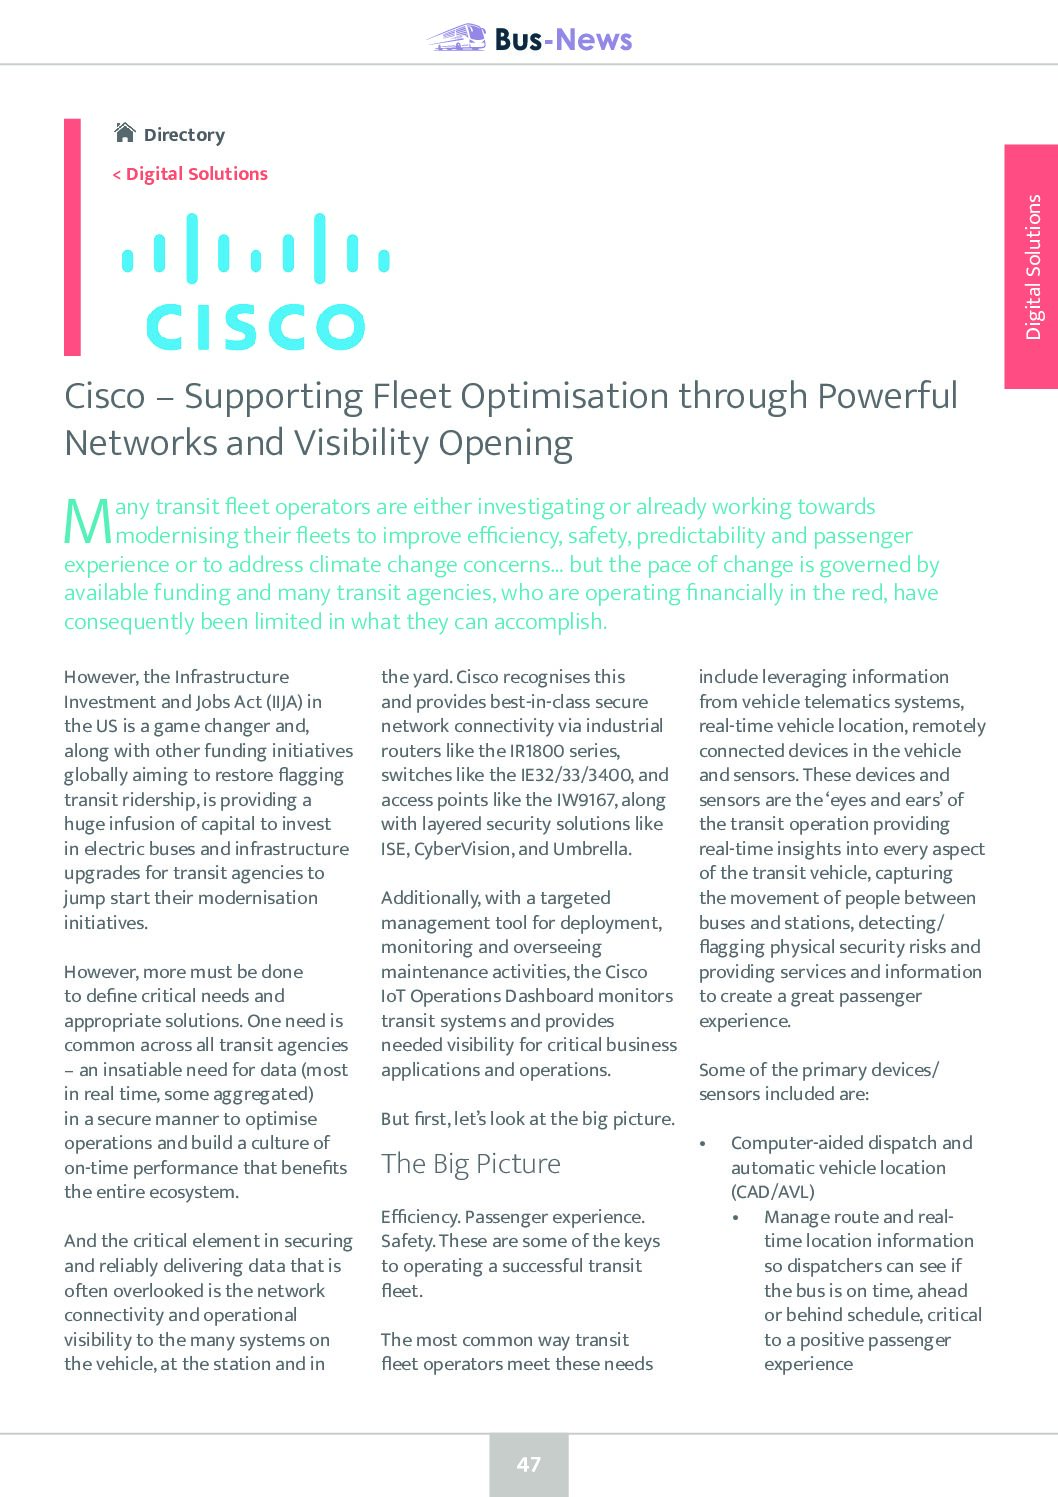 Supporting Fleet Optimisation through Powerful Networks and Visibility Opening